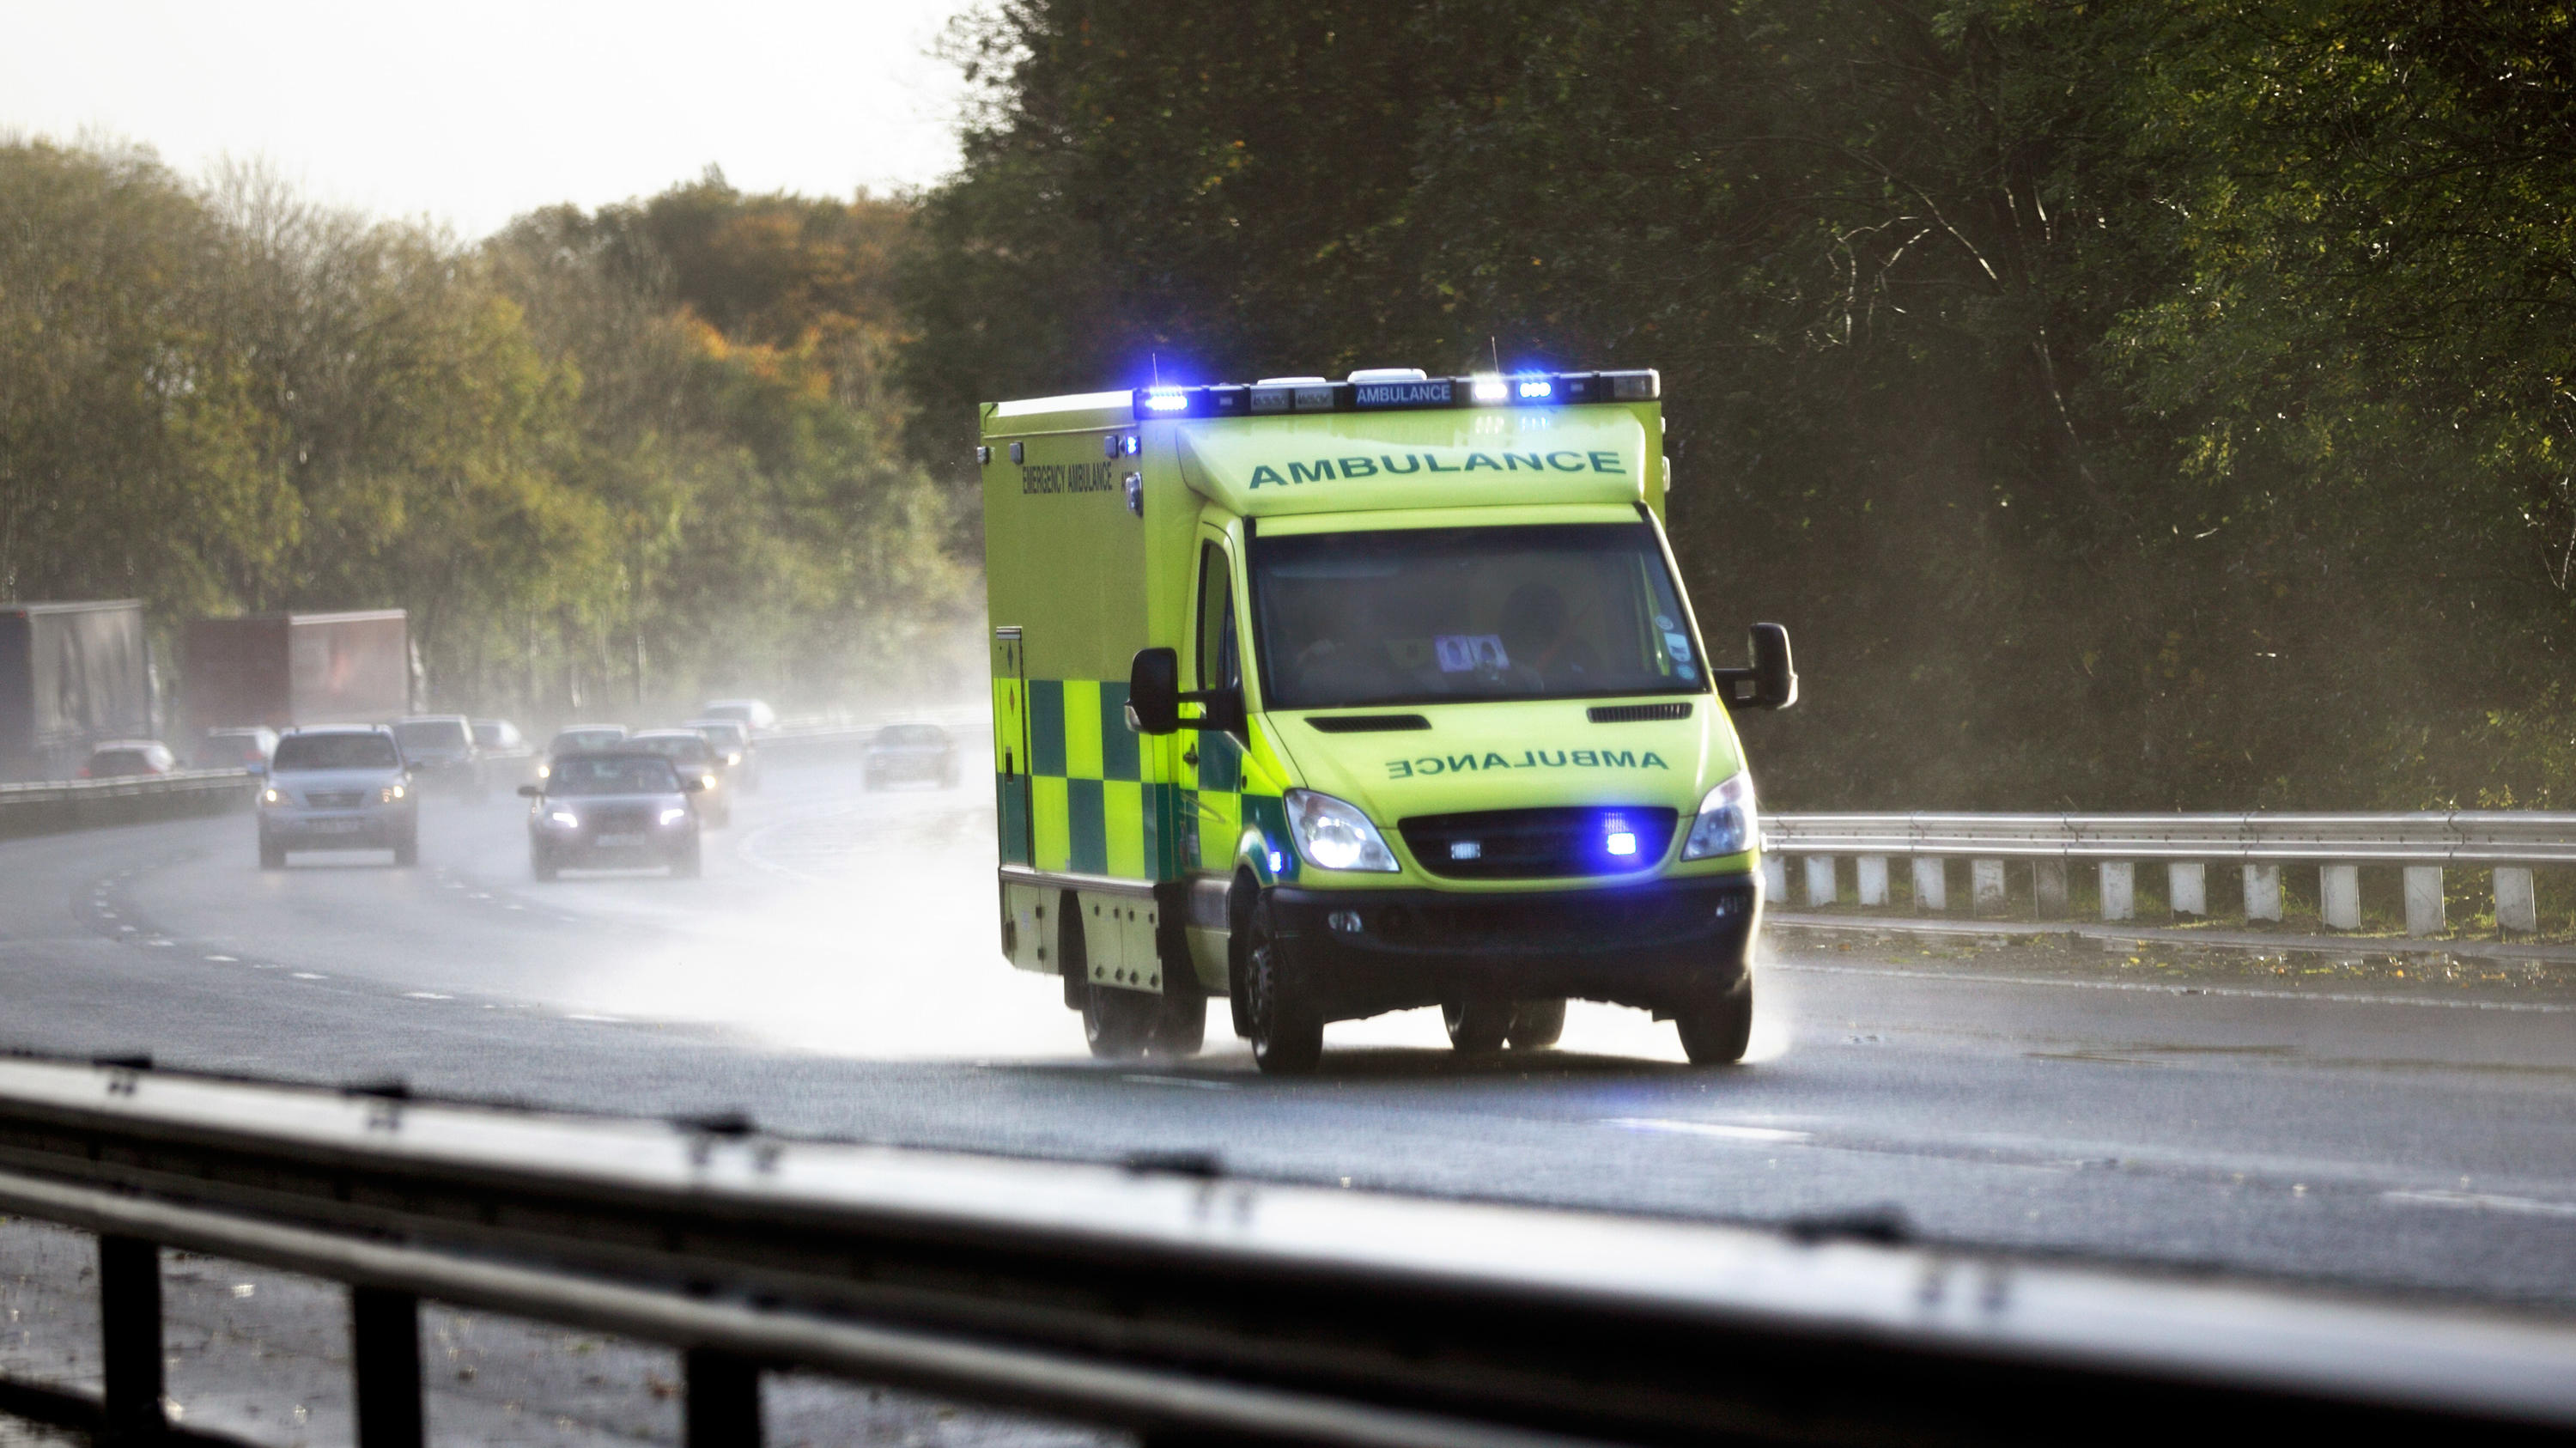 Ambulance on route to an incident